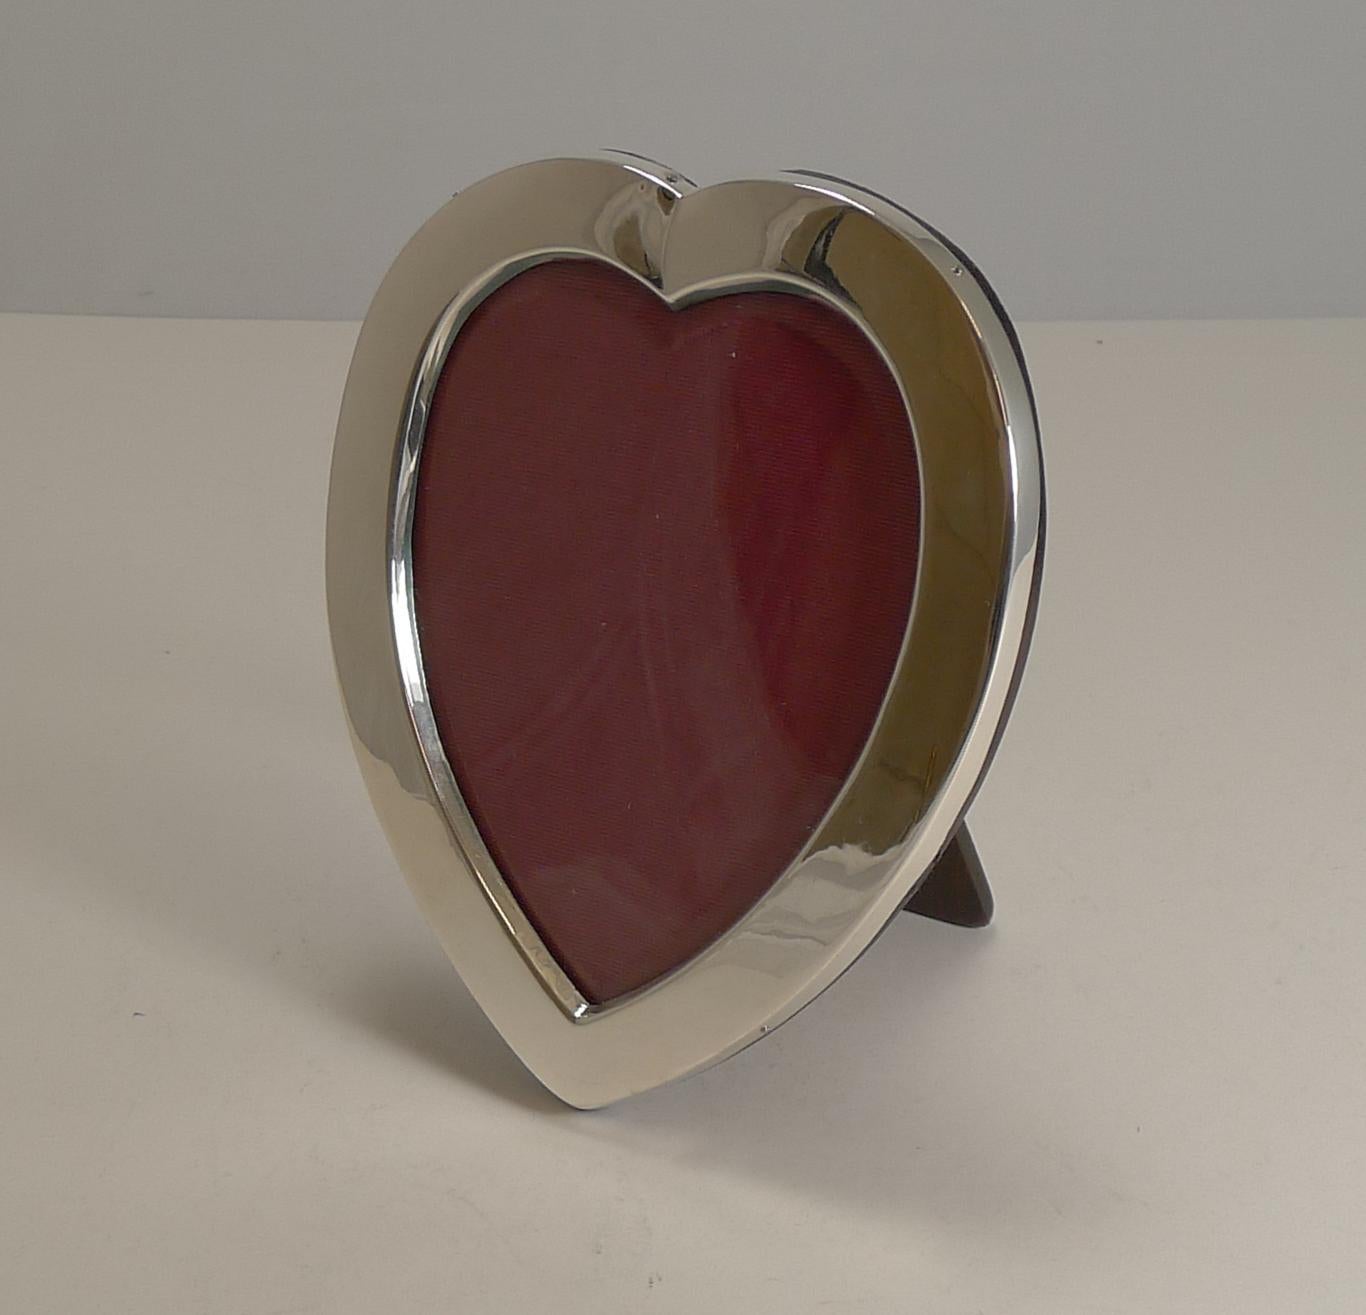 Late Victorian Romantic English Sterling Silver Heart Shaped Photograph Frame, 1899